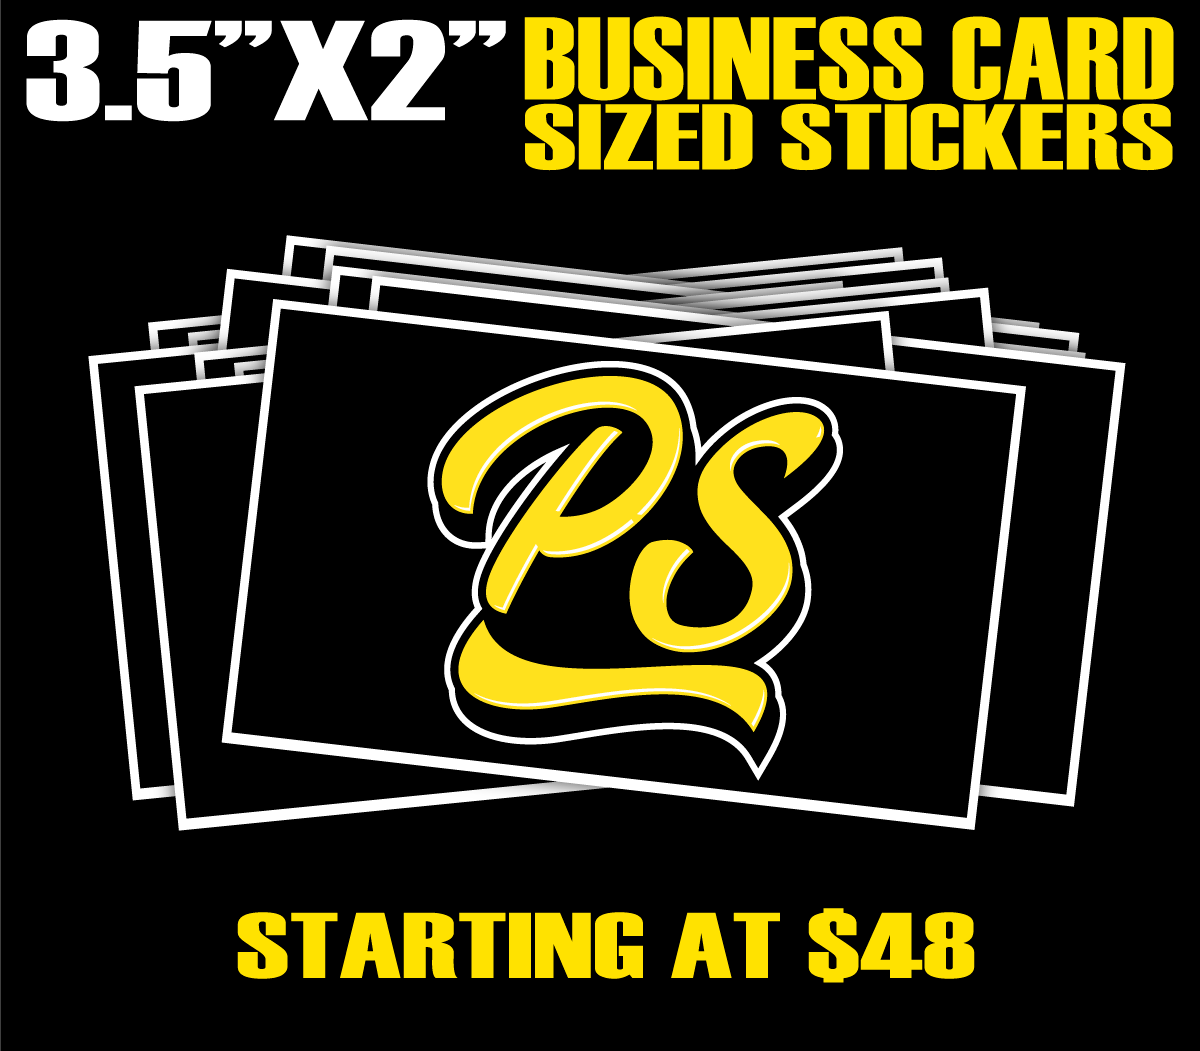 Business card sized stickers.